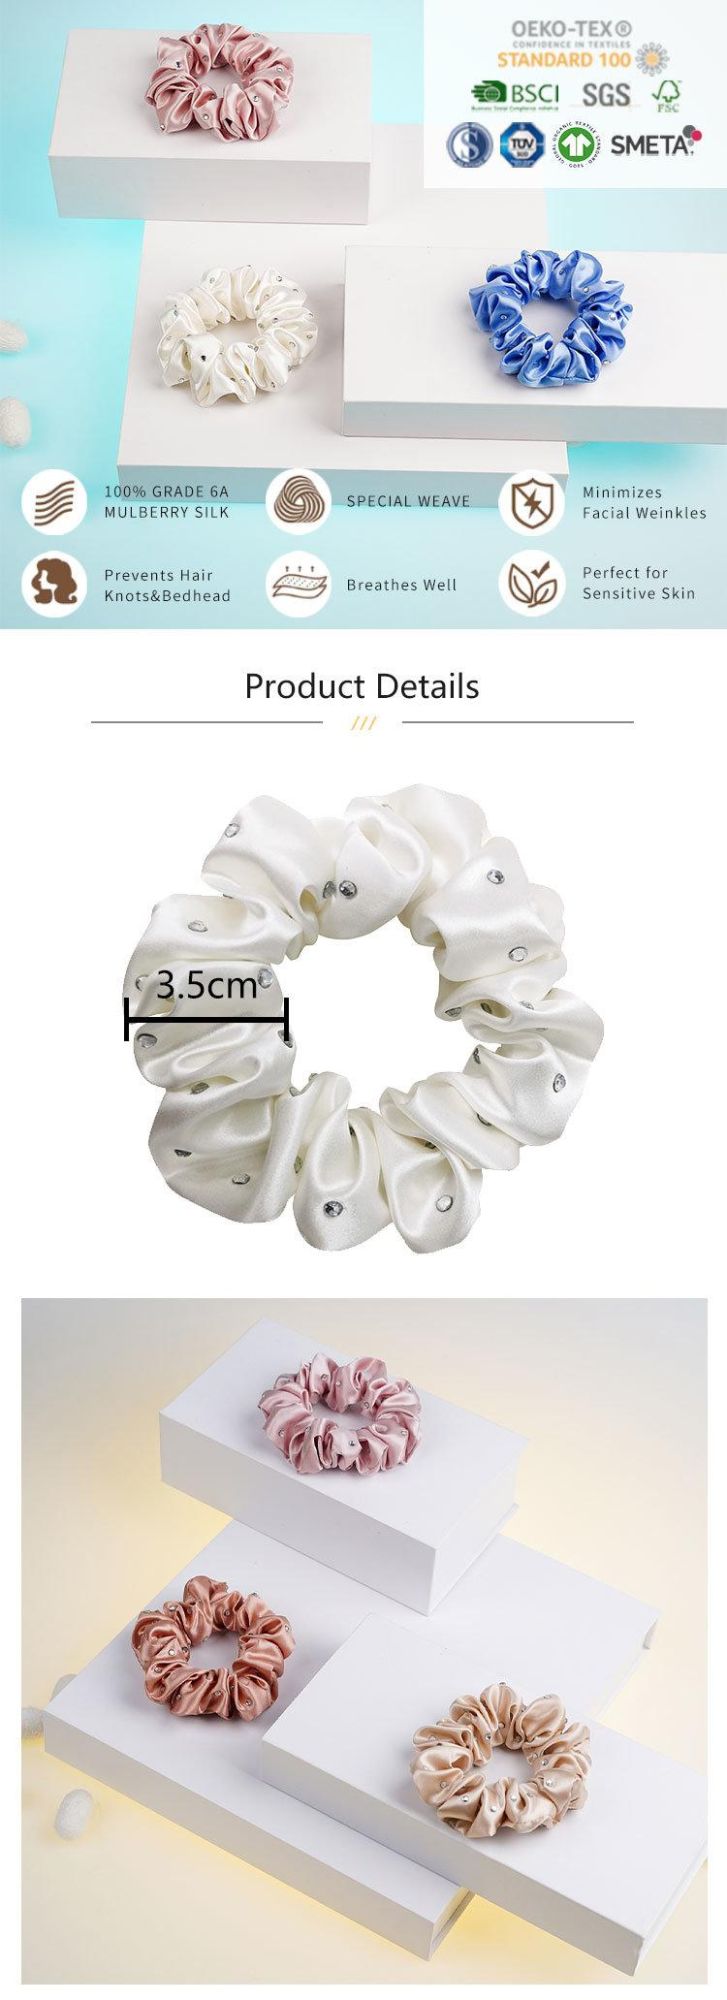 Crystal Mulberry Silk Scrunchies for 3.5cm in New Fashionable Style